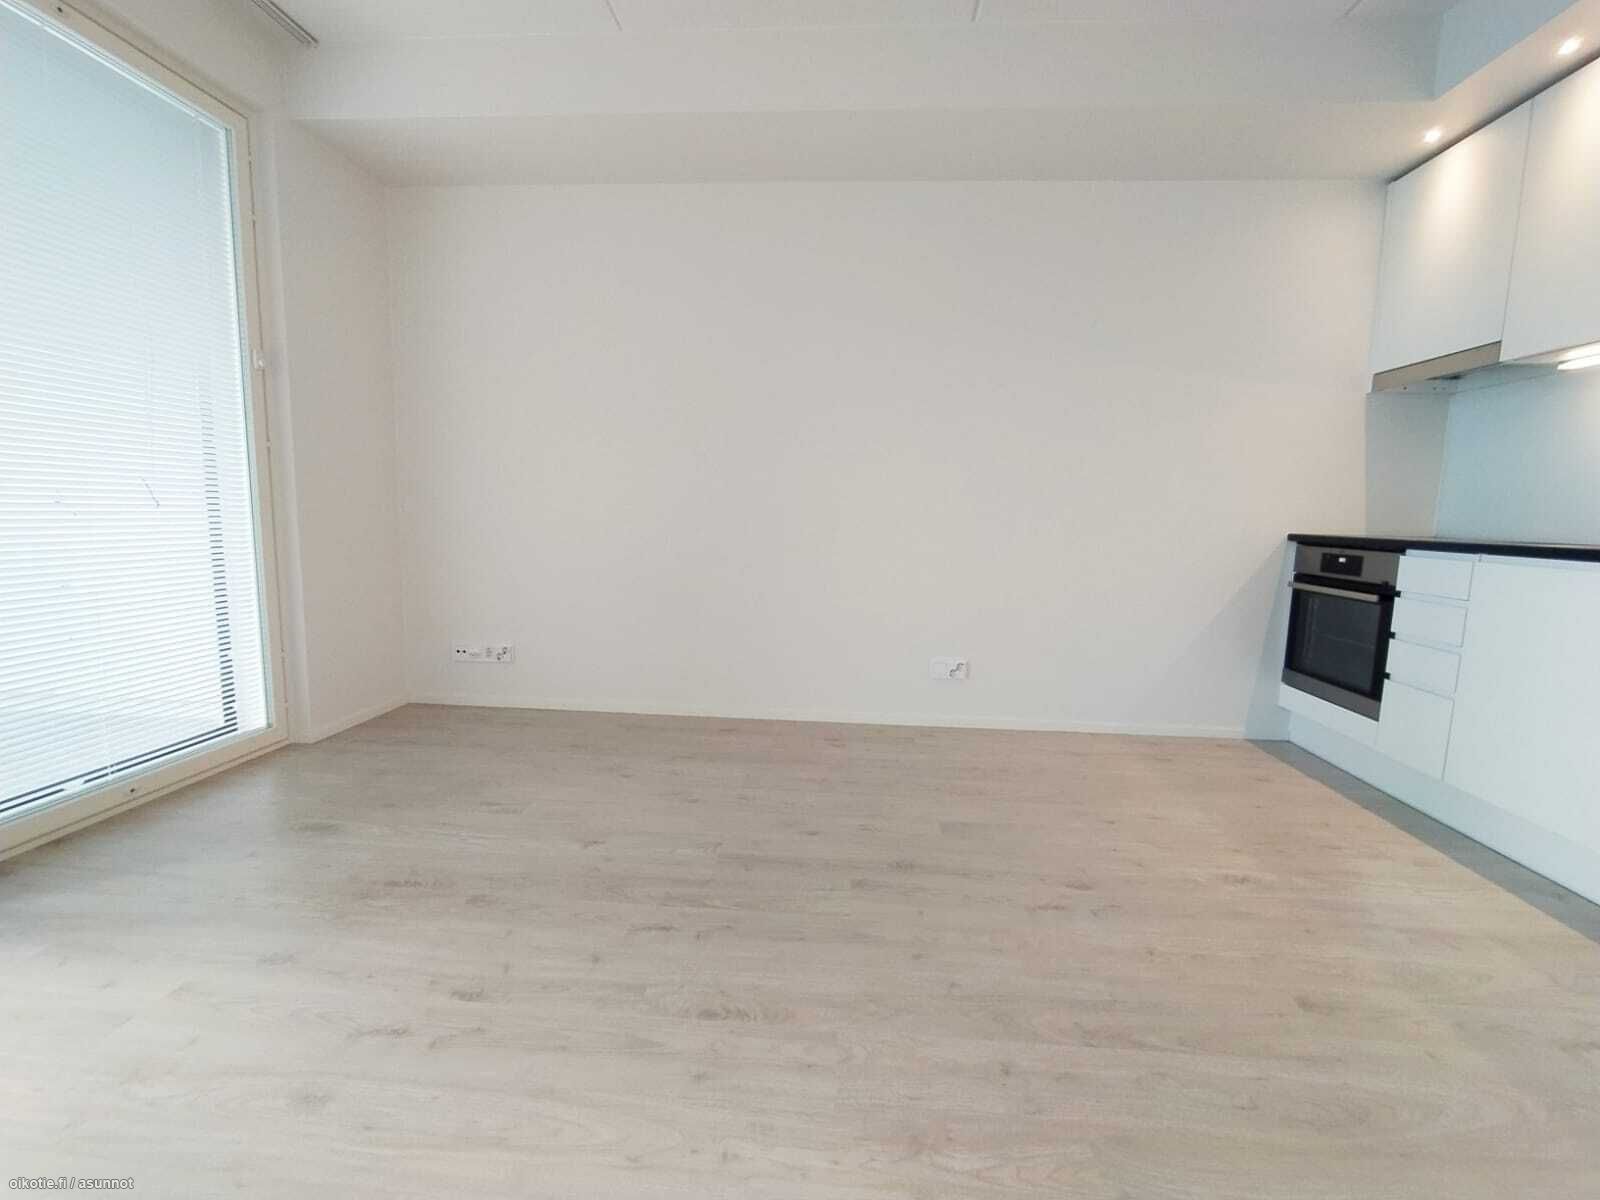 24 m² Aitolahdentie 34 A, 33580 Tampere 1h+kt+. – Oikotie 17220142 –  SKVL